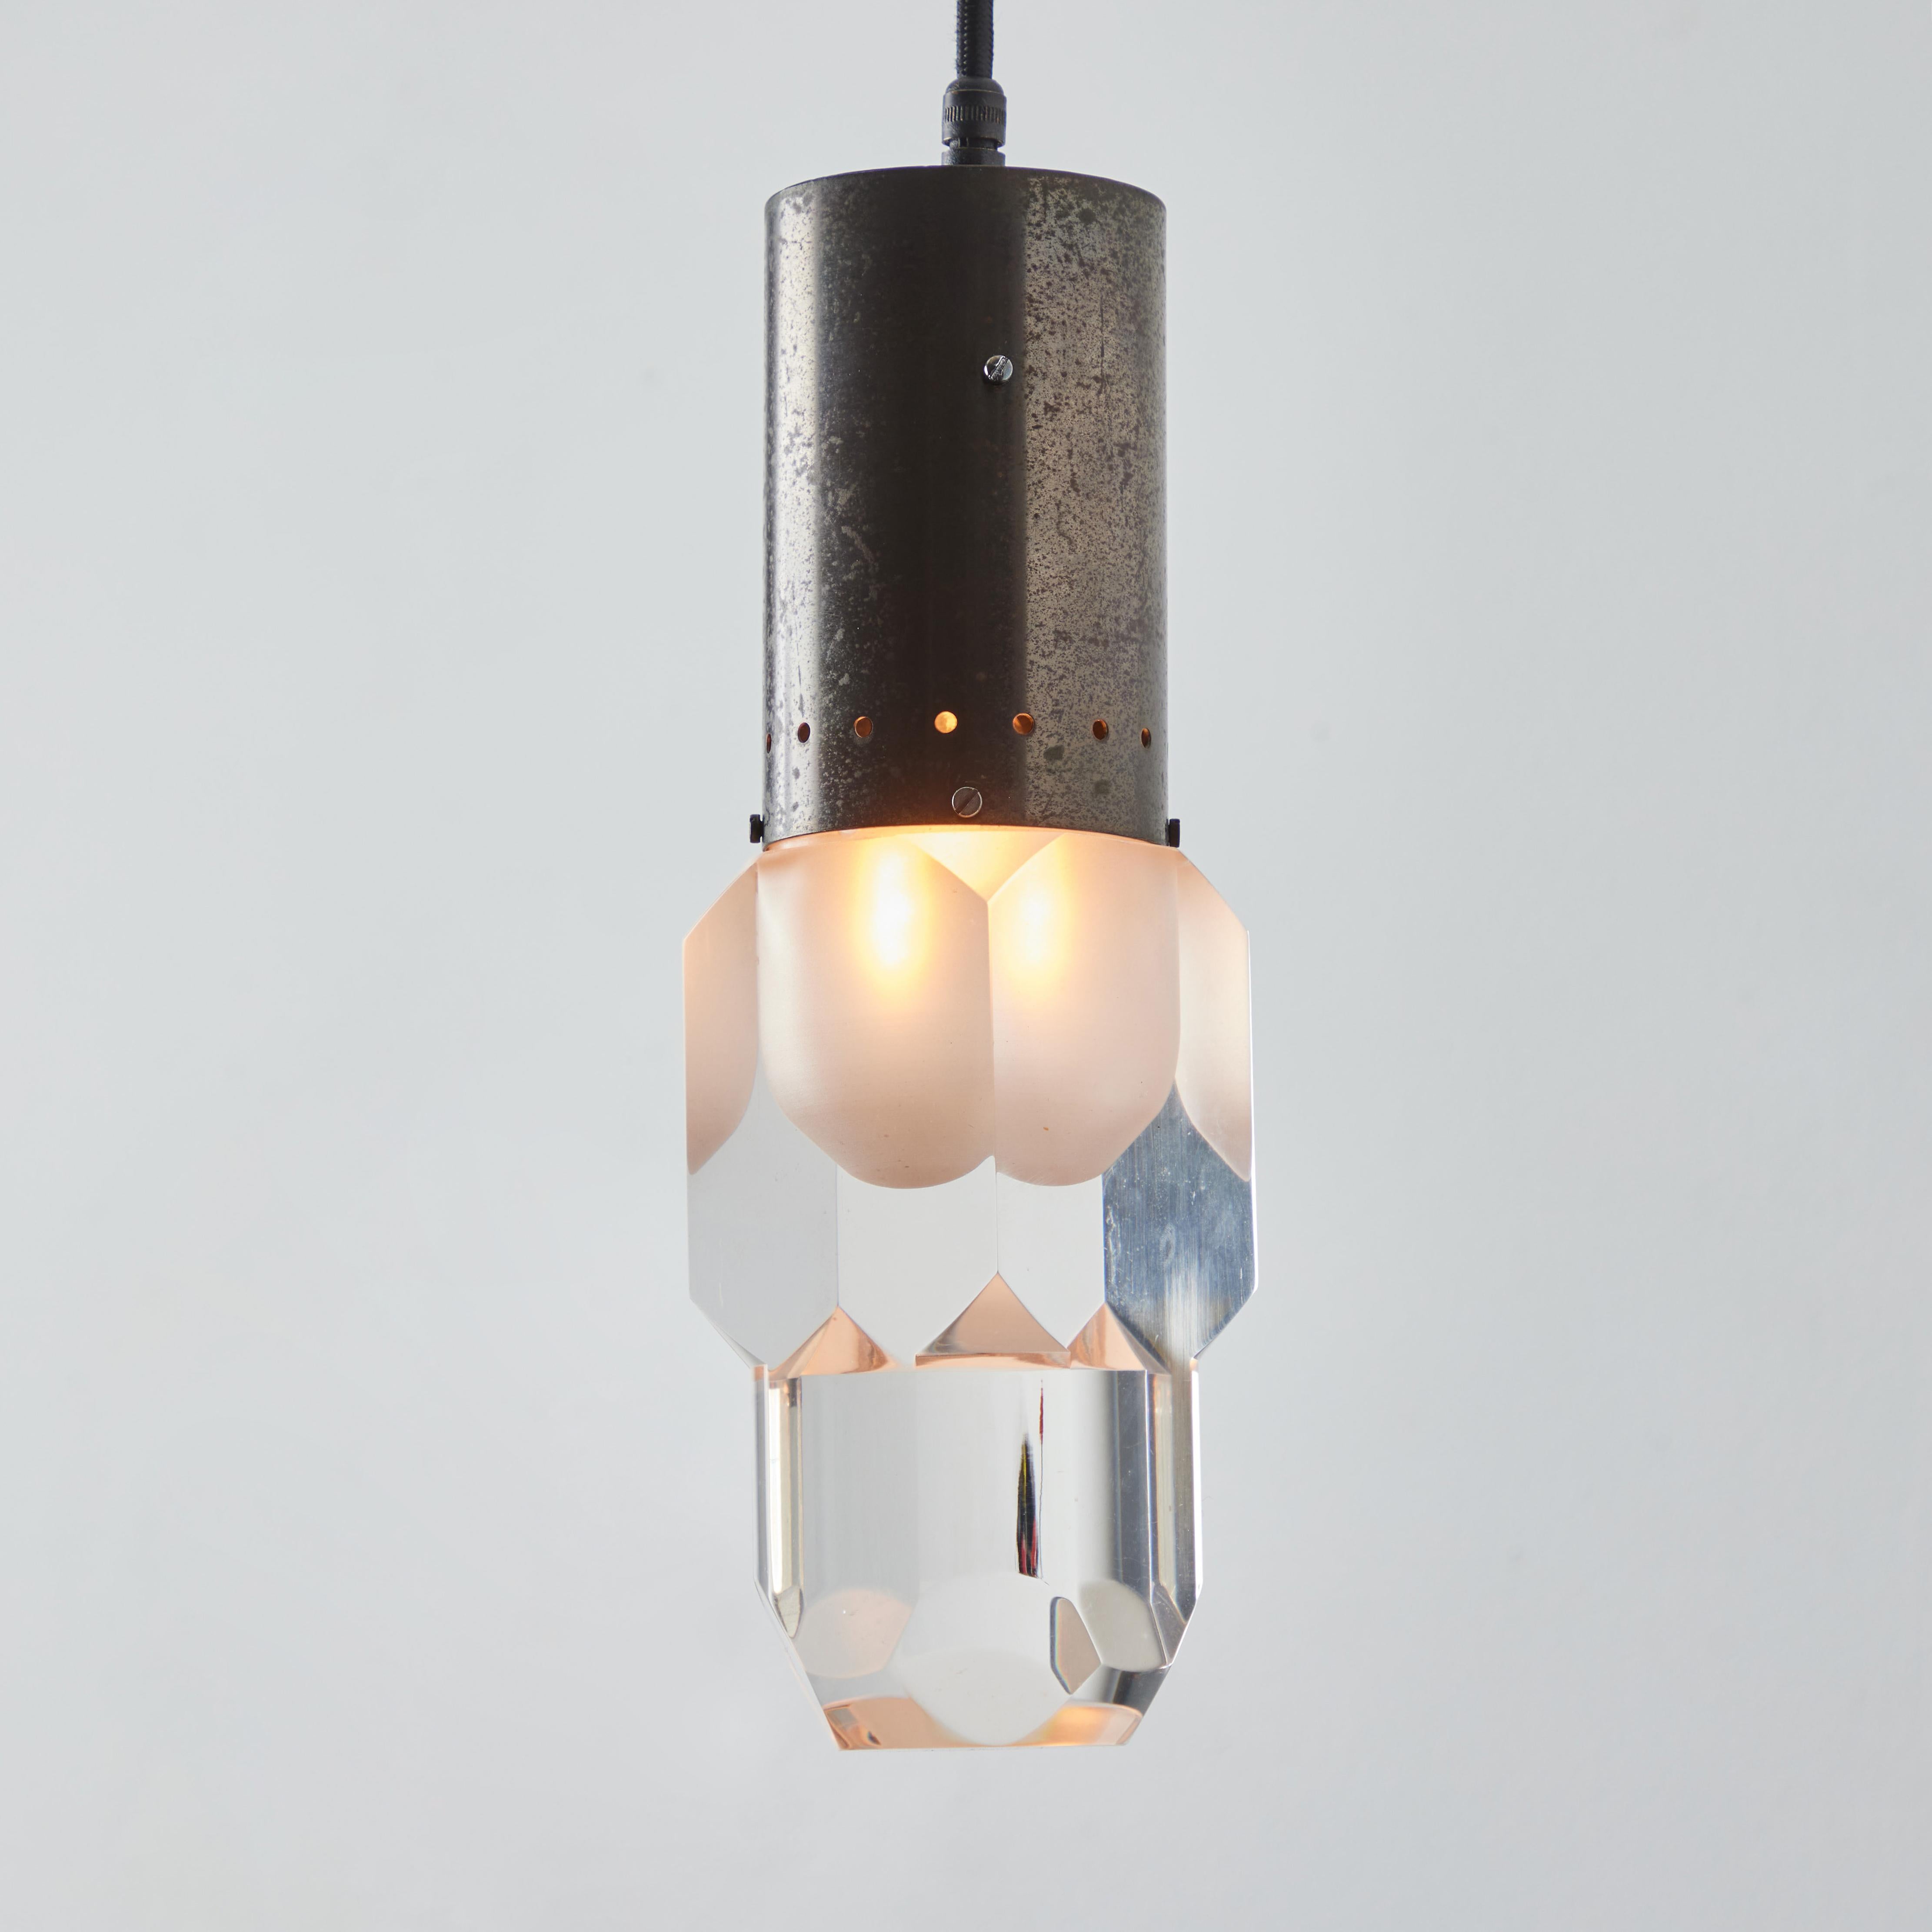 1960s Faceted Diffuser Pendant Lamp Attributed to Stilnovo For Sale 6